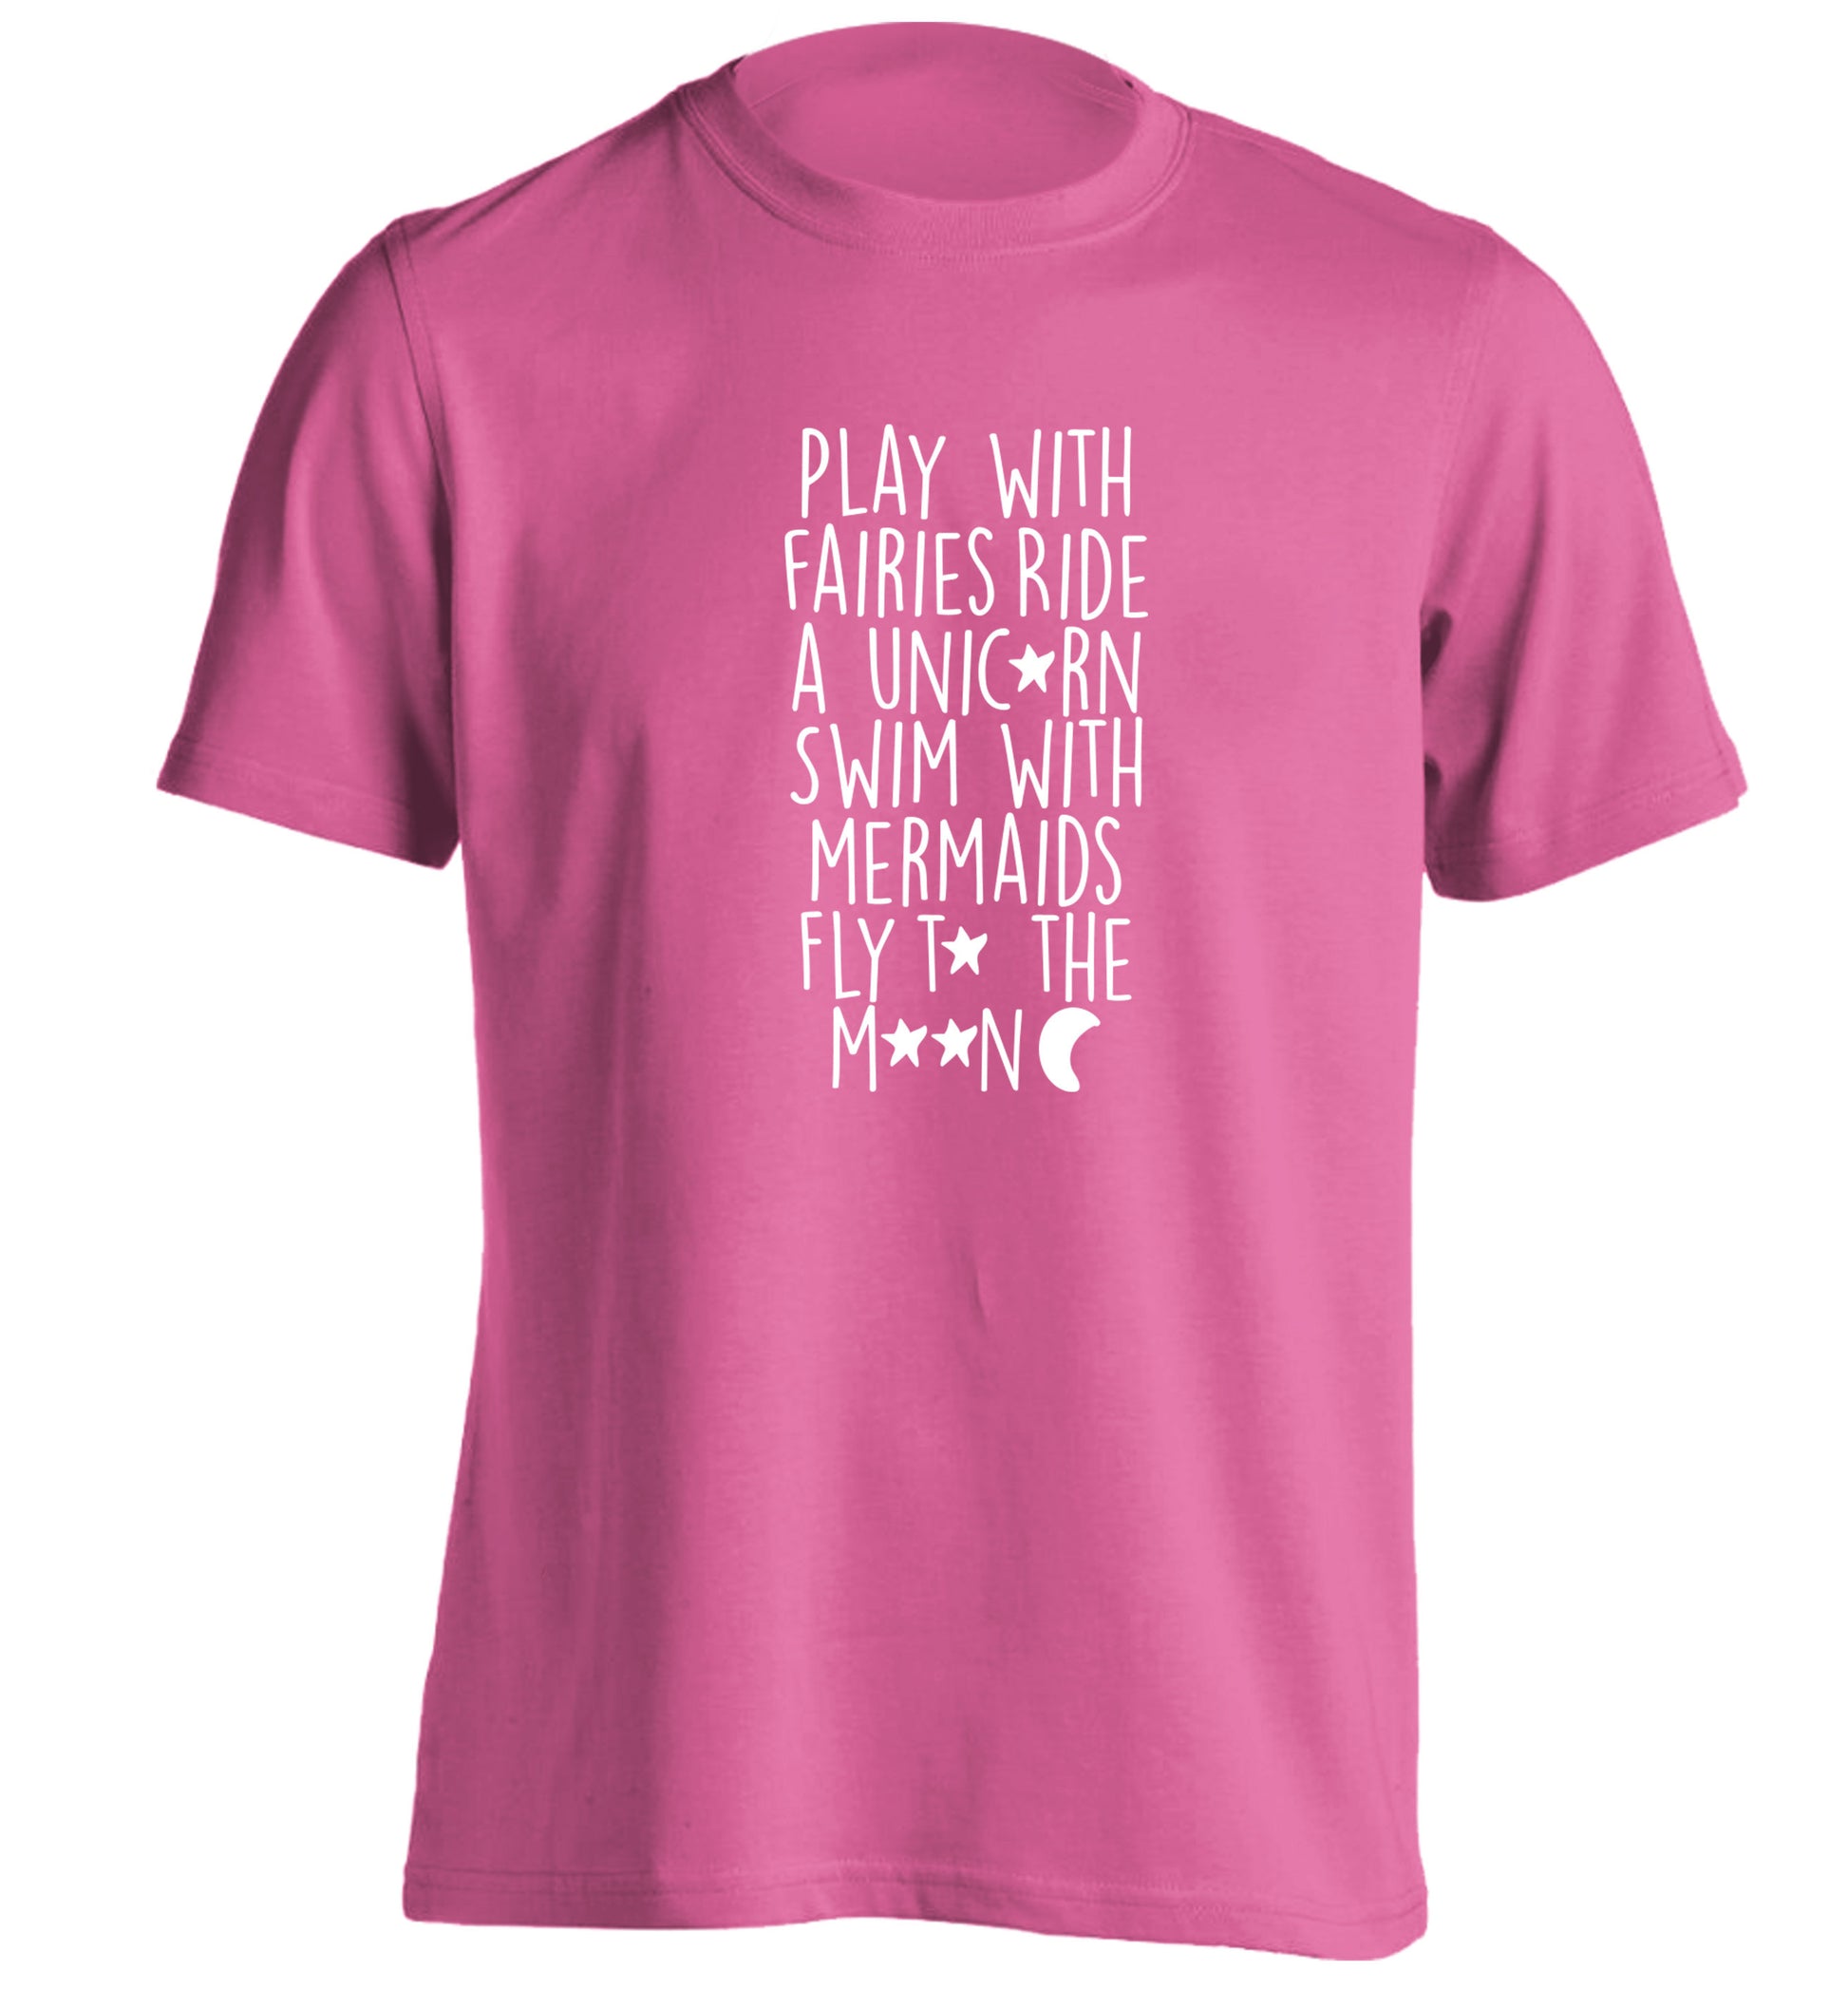 Play with fairies ride a unicorn swim with mermaids fly to the moon adults unisex pink Tshirt 2XL